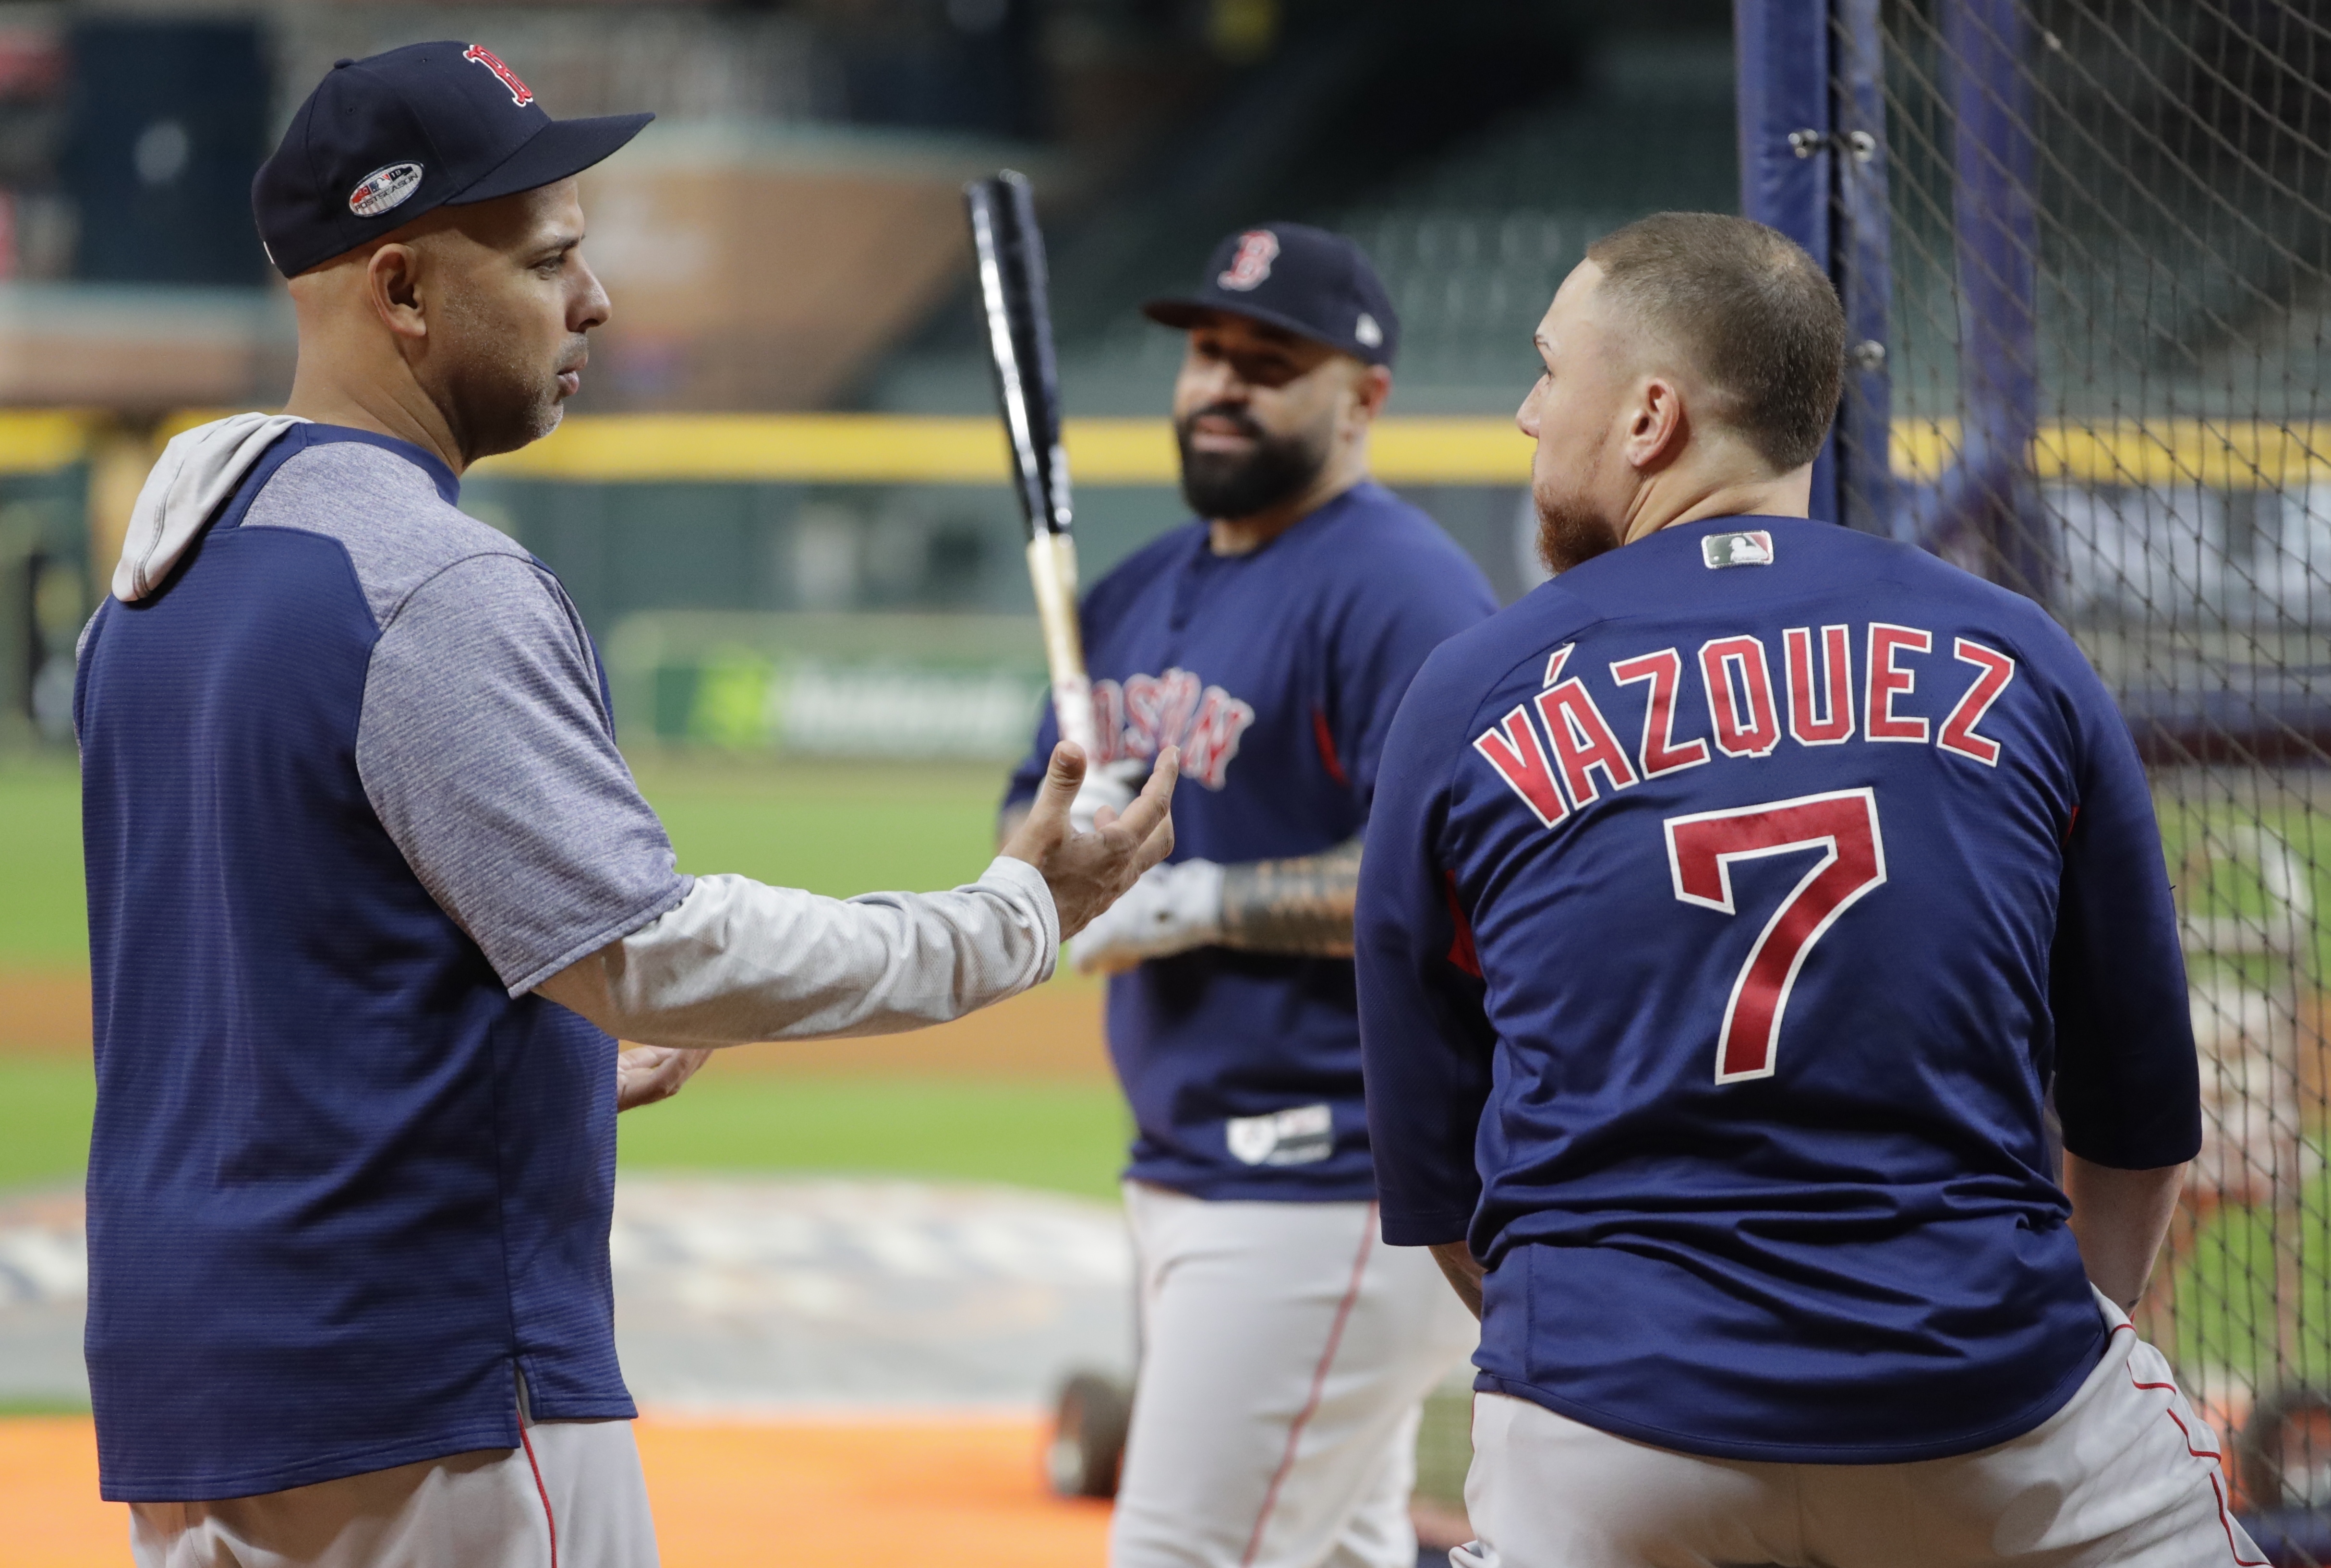 Alex Cora returning as Boston Red Sox manager? Christian Vazquez would love it, and floats Carlos Beltran as bench coach, too